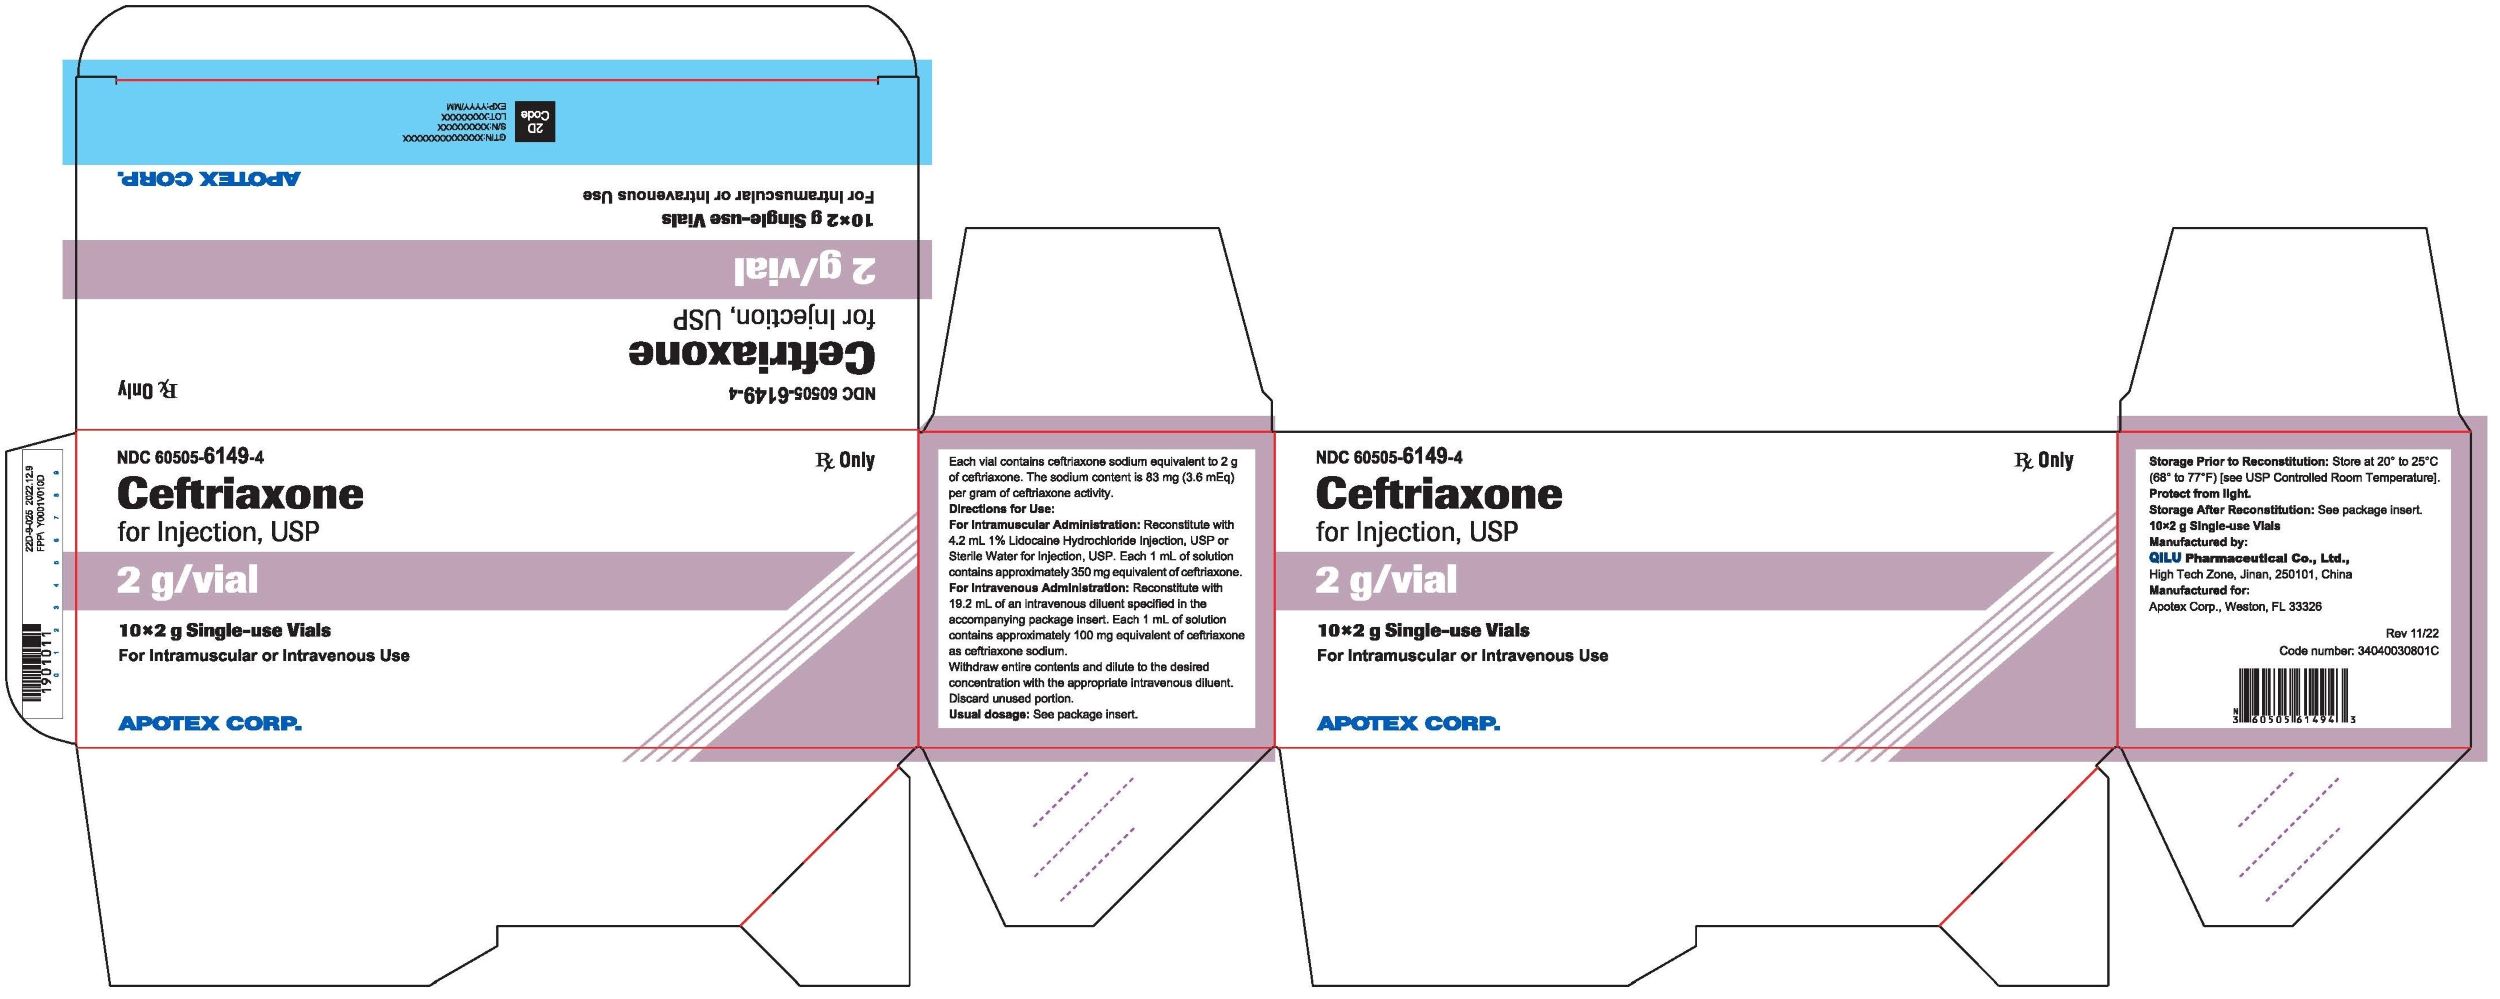 Ceftriaxone for Injection 2 g Carton Label (10 Pack)-High Tech